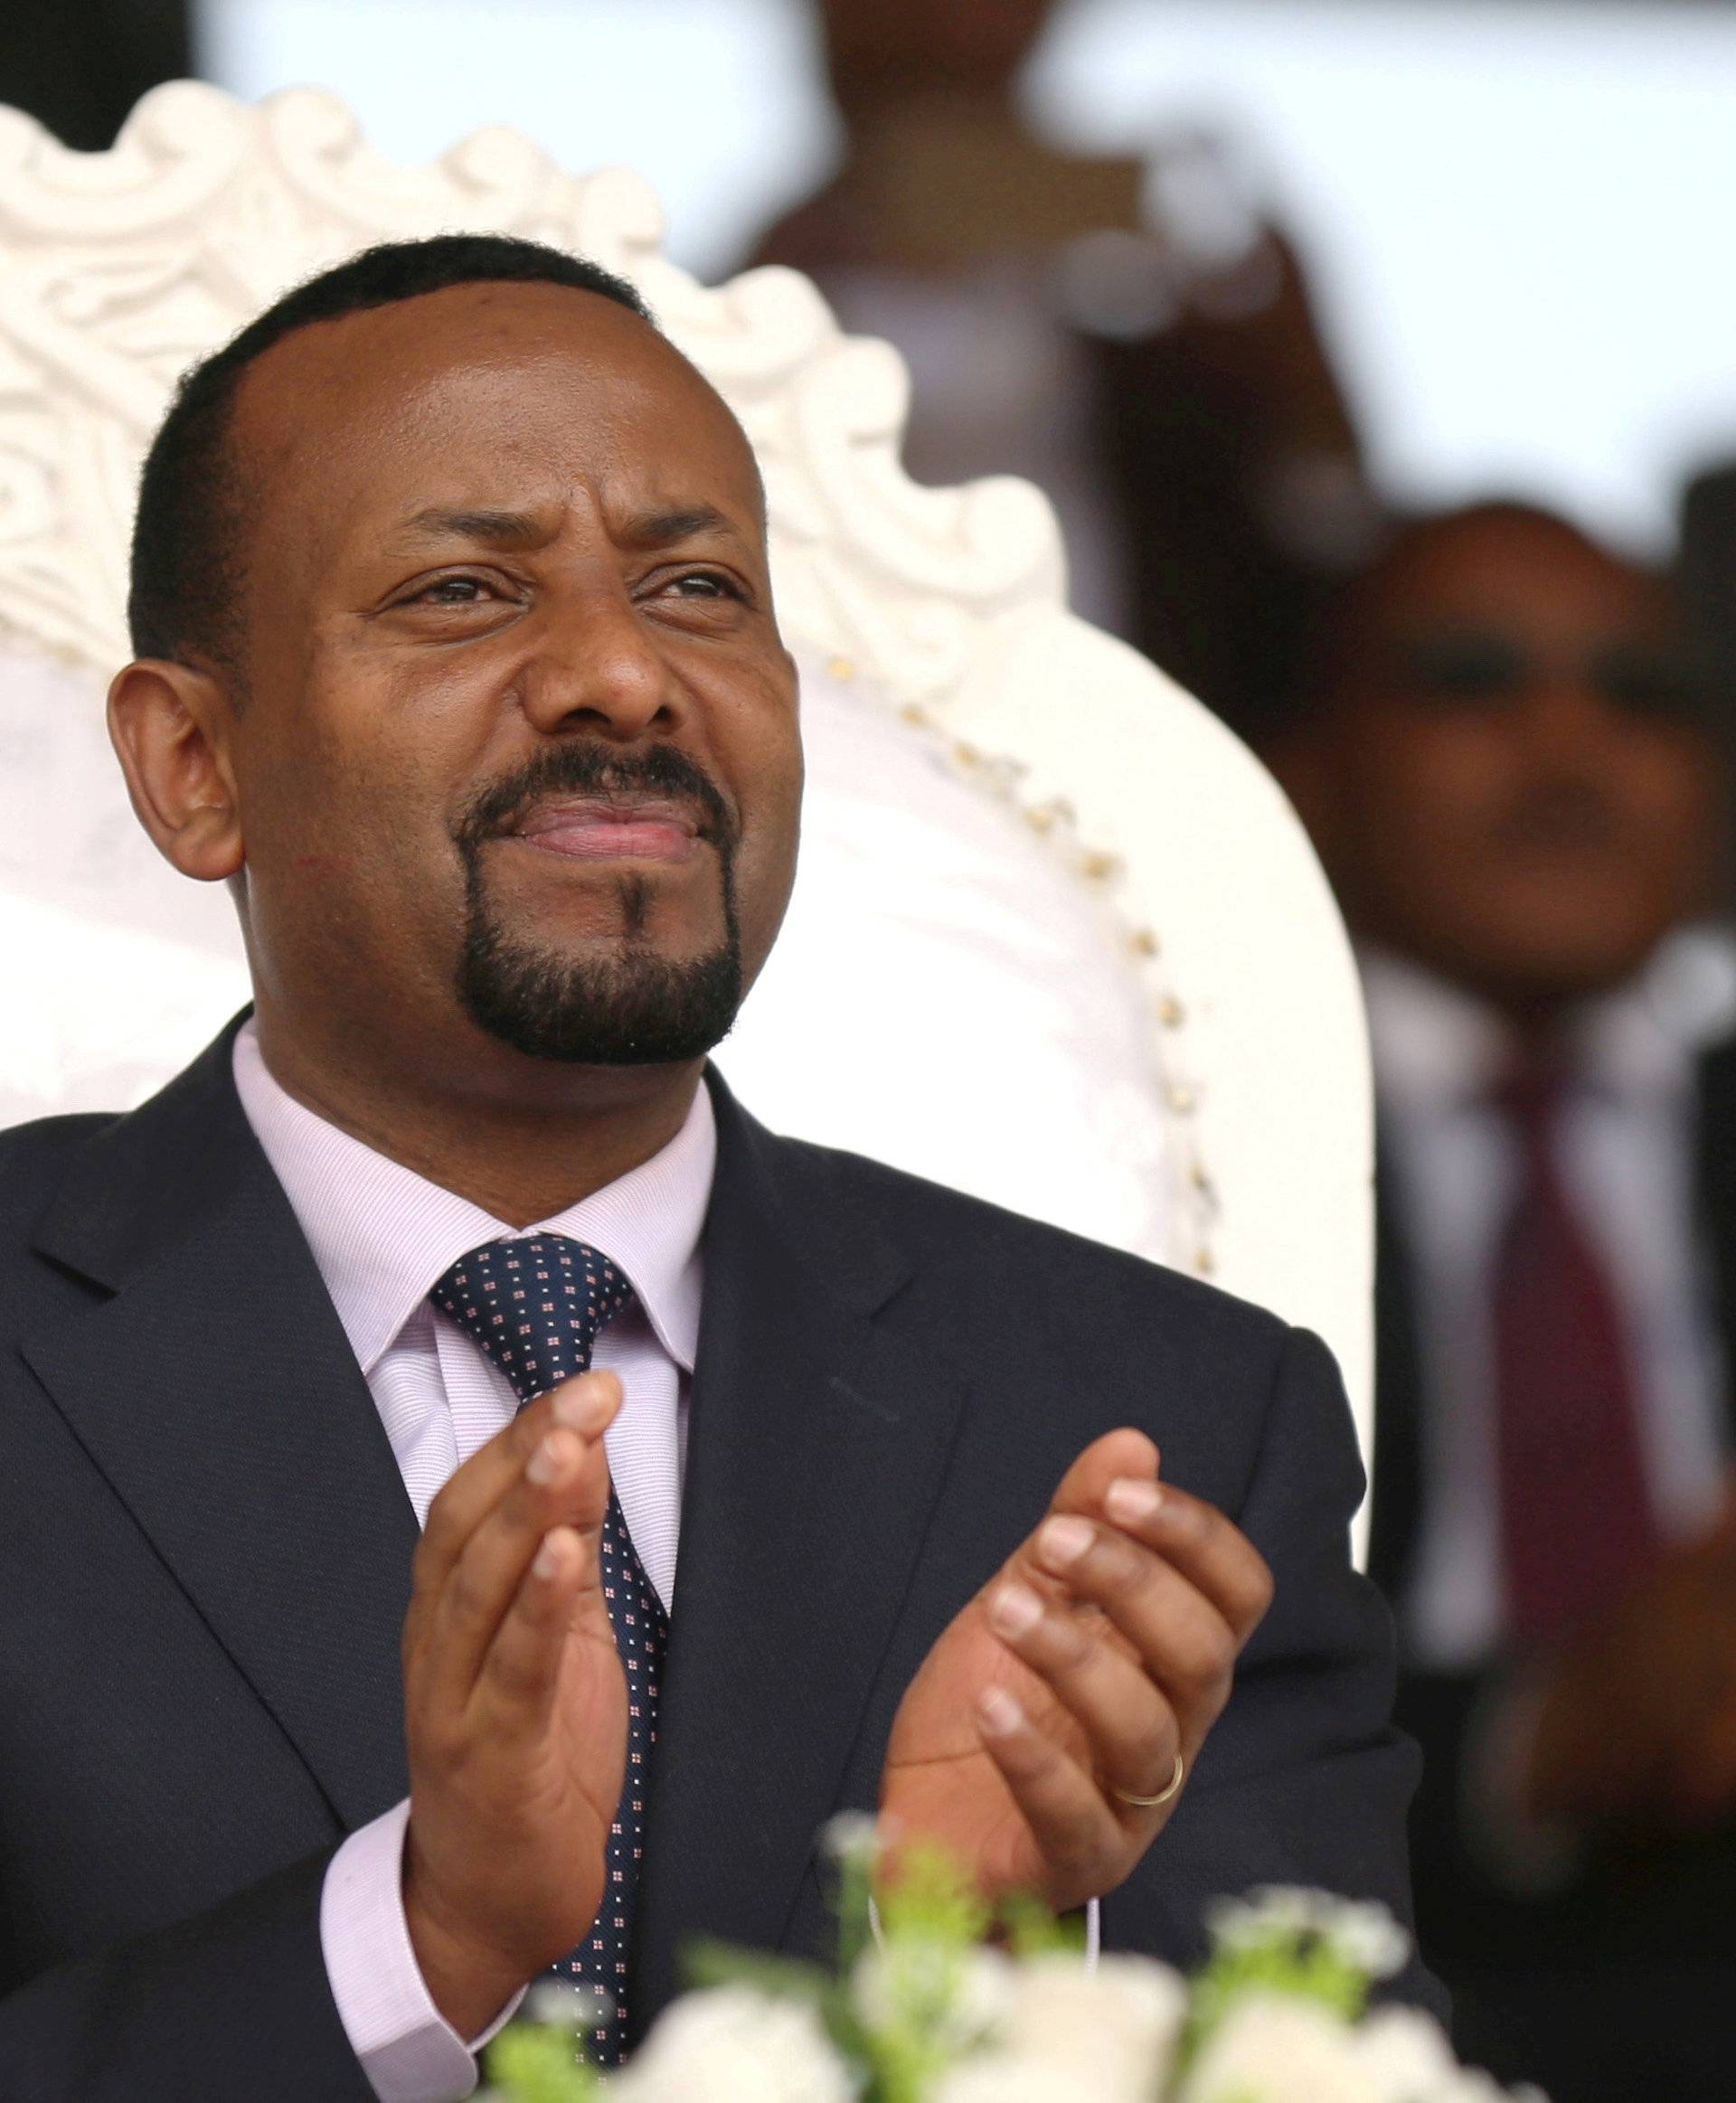 FILE PHOTO: Ethiopia's newly elected prime minister Abiy Ahmed attends a rally during his visit to Ambo in the Oromiya region